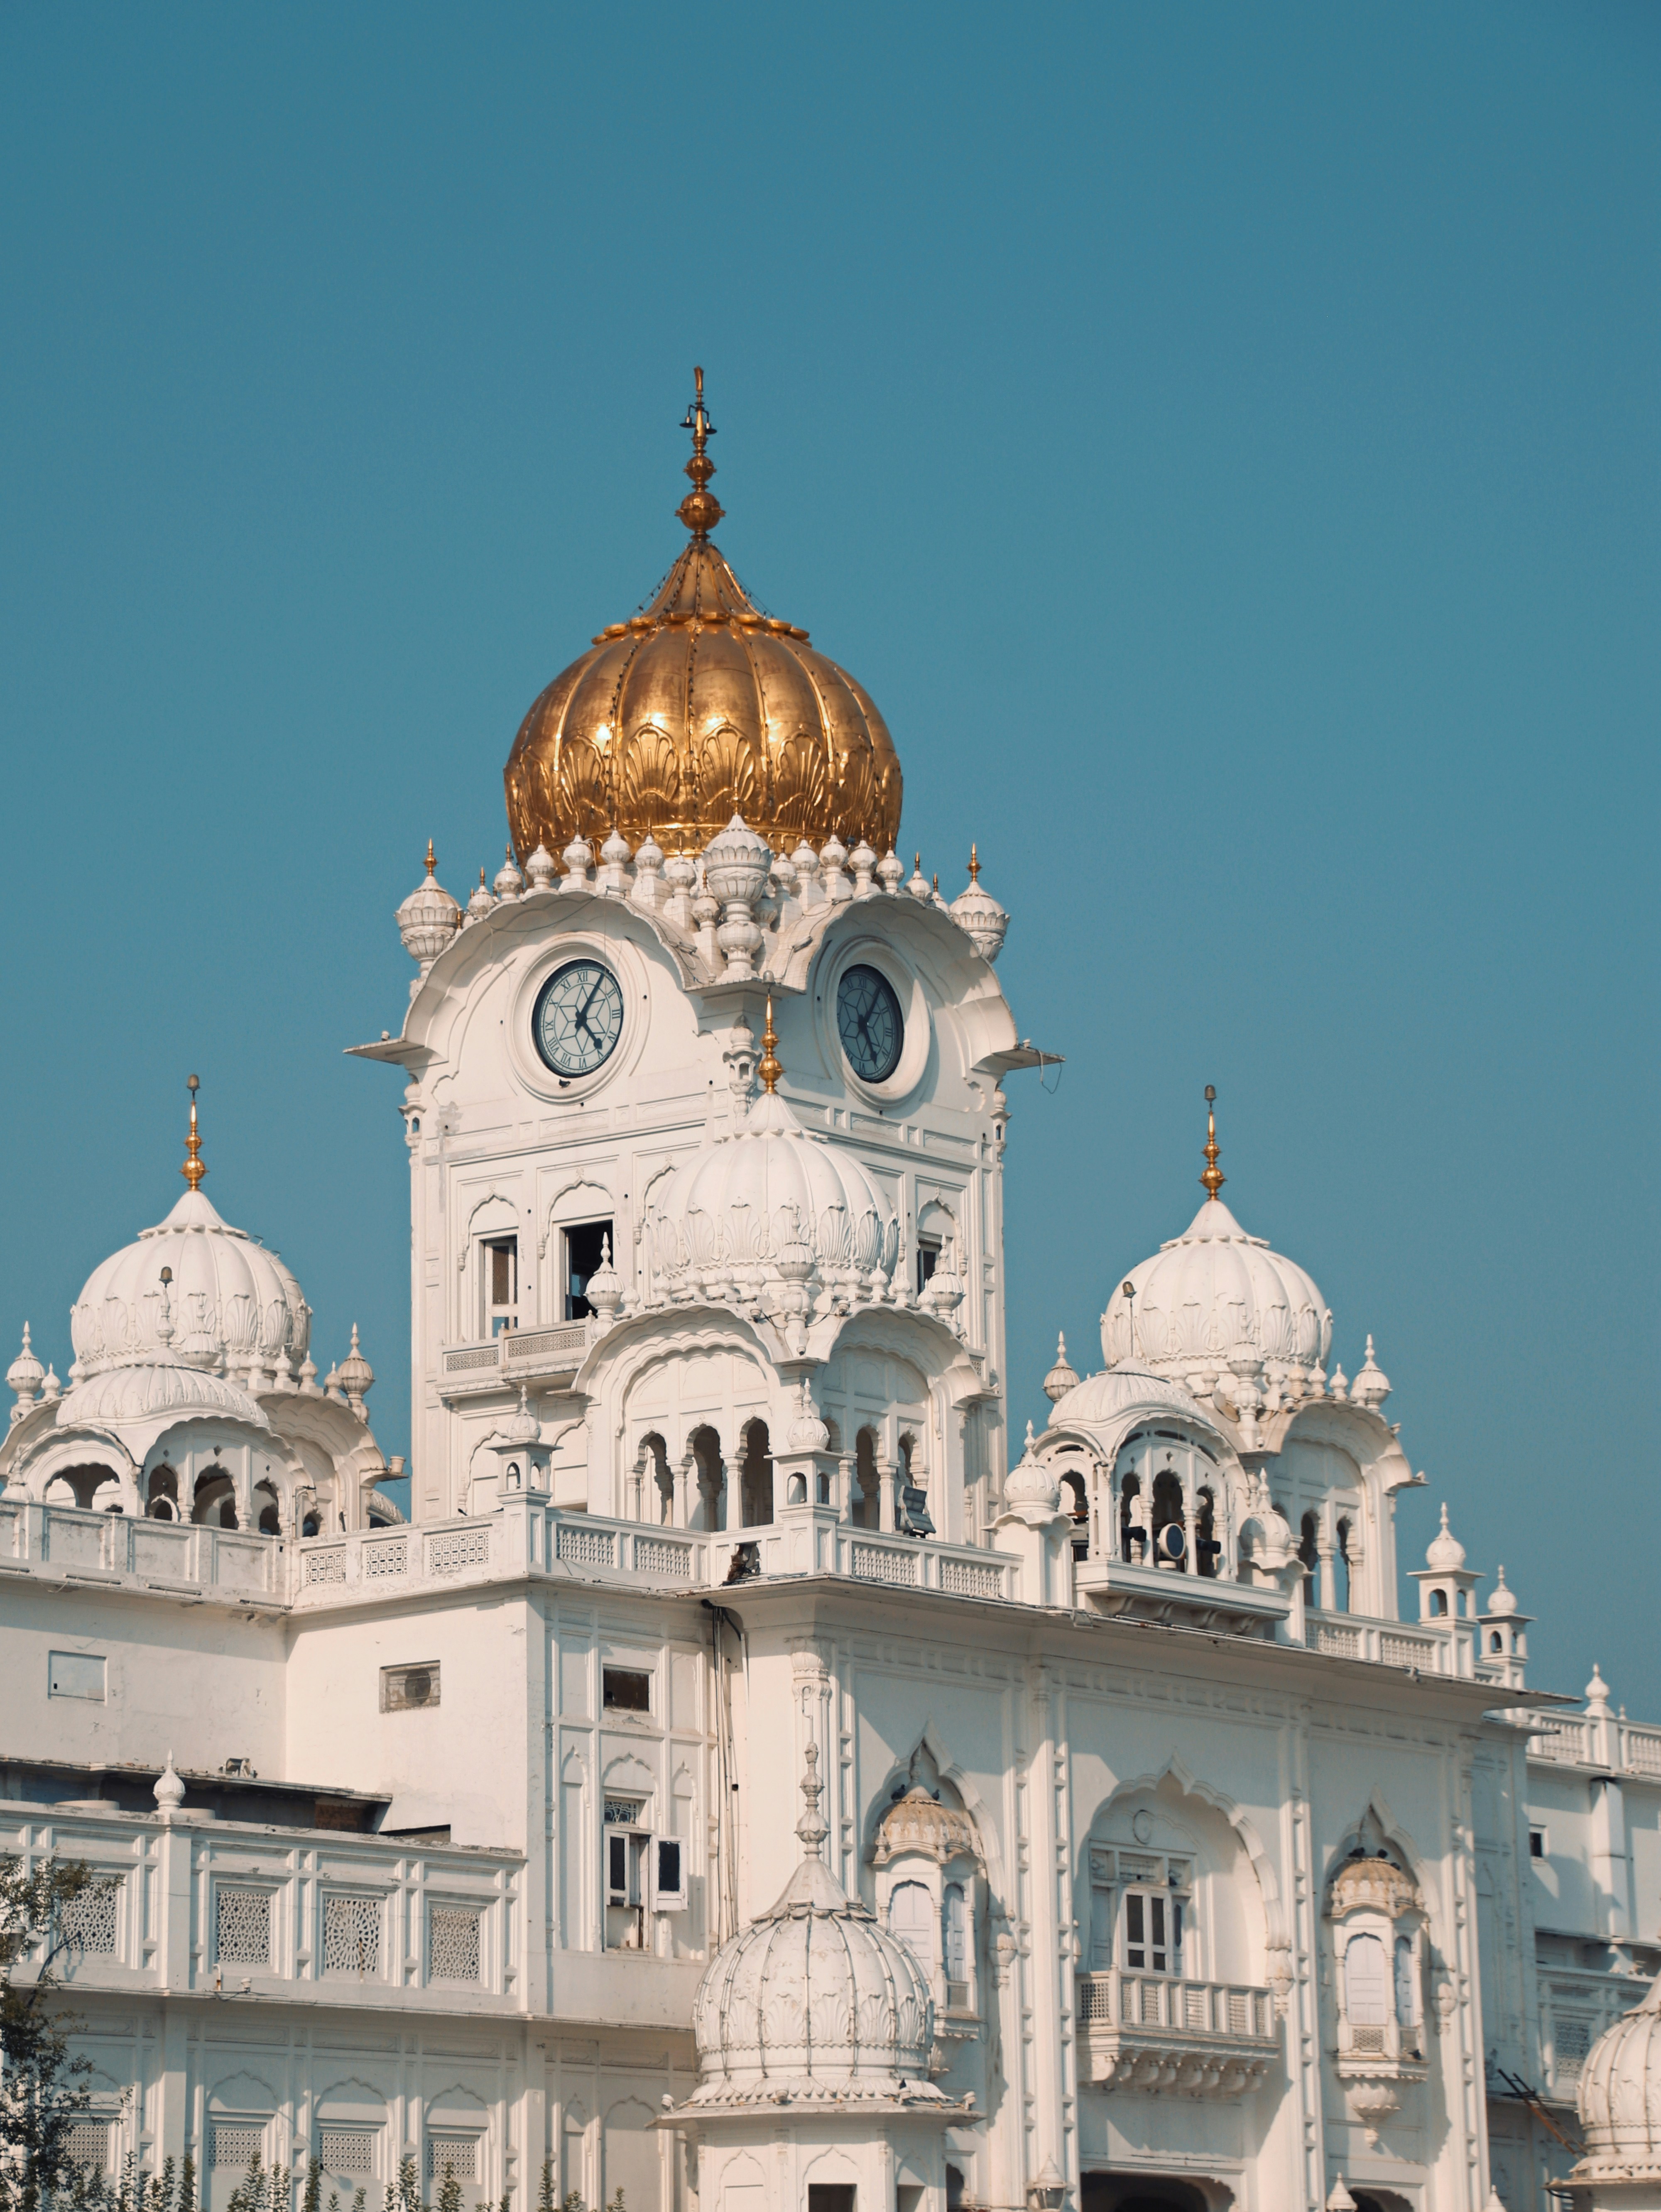 great photo recipe,how to photograph last month visit of amritsar ; a large white building with a gold dome